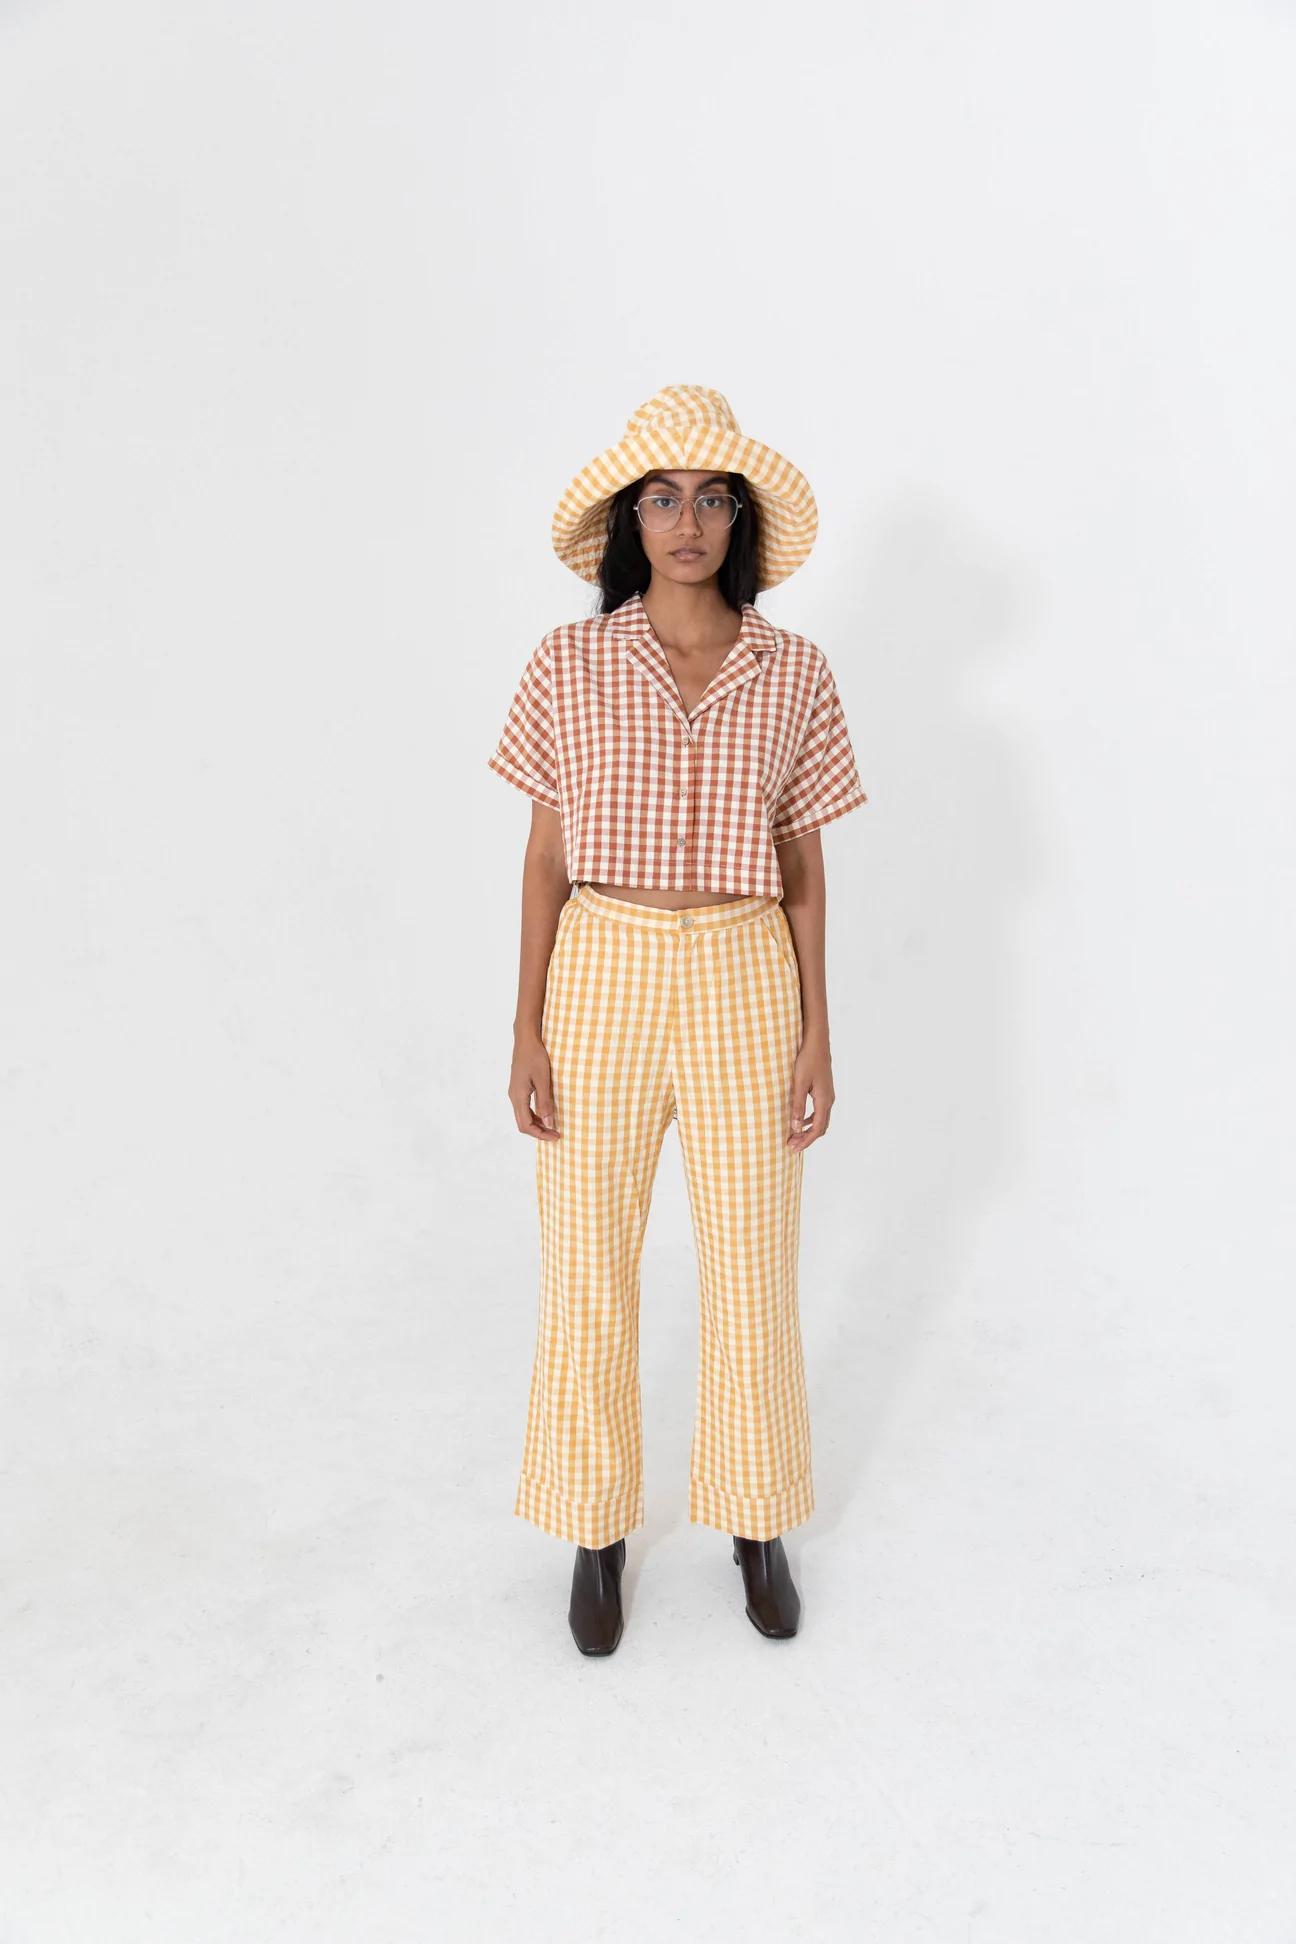 Product Image for Spring Gingham Top, Rust